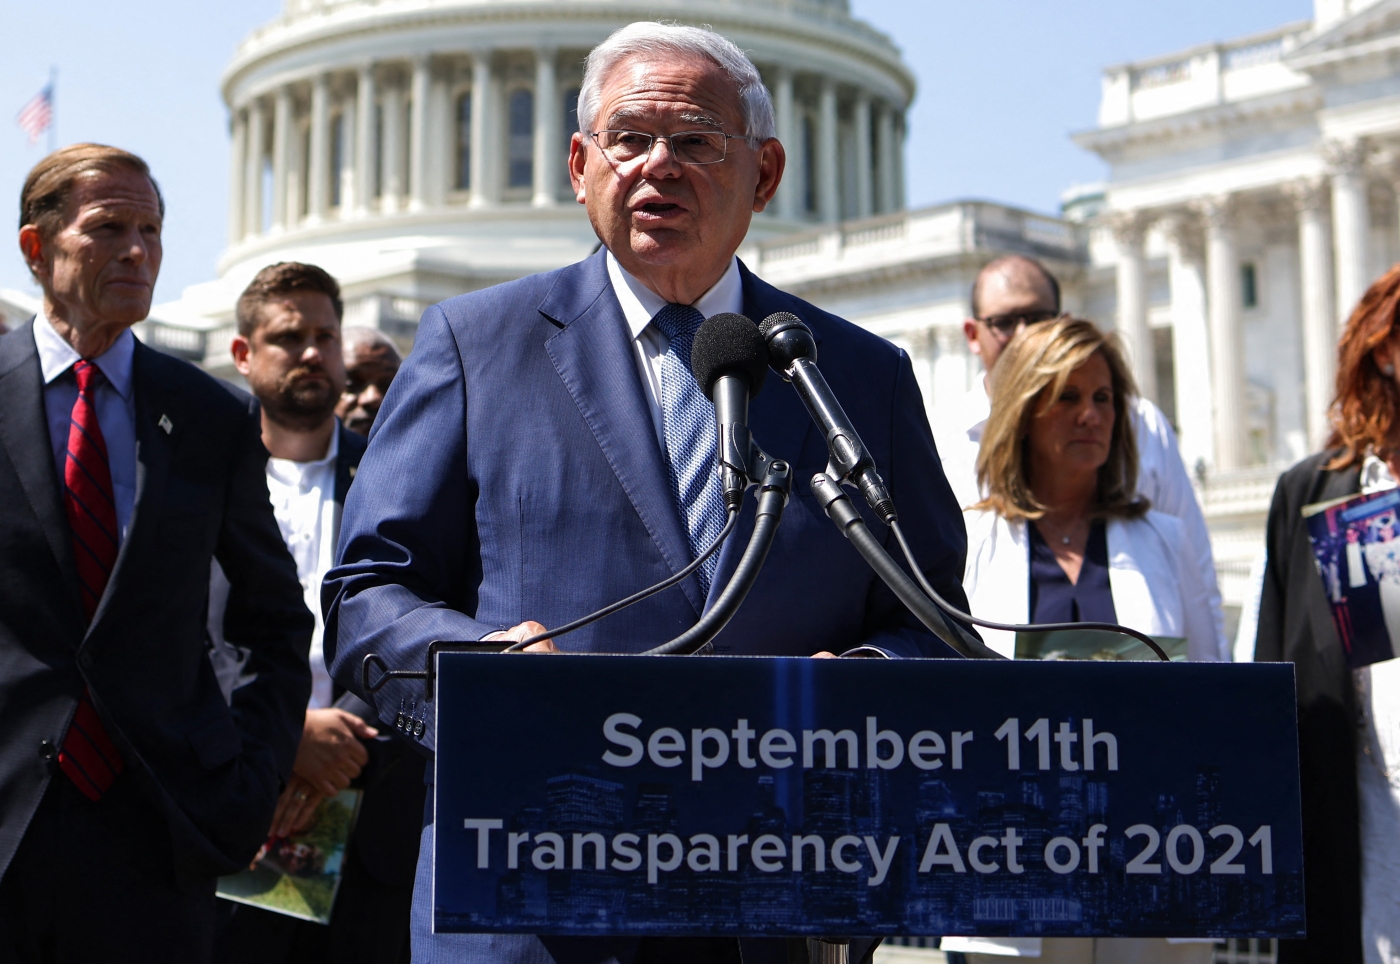 Senator Bob Menendez speaks at a press conference at the Capitol Building on 5 August 2021 in Washington.